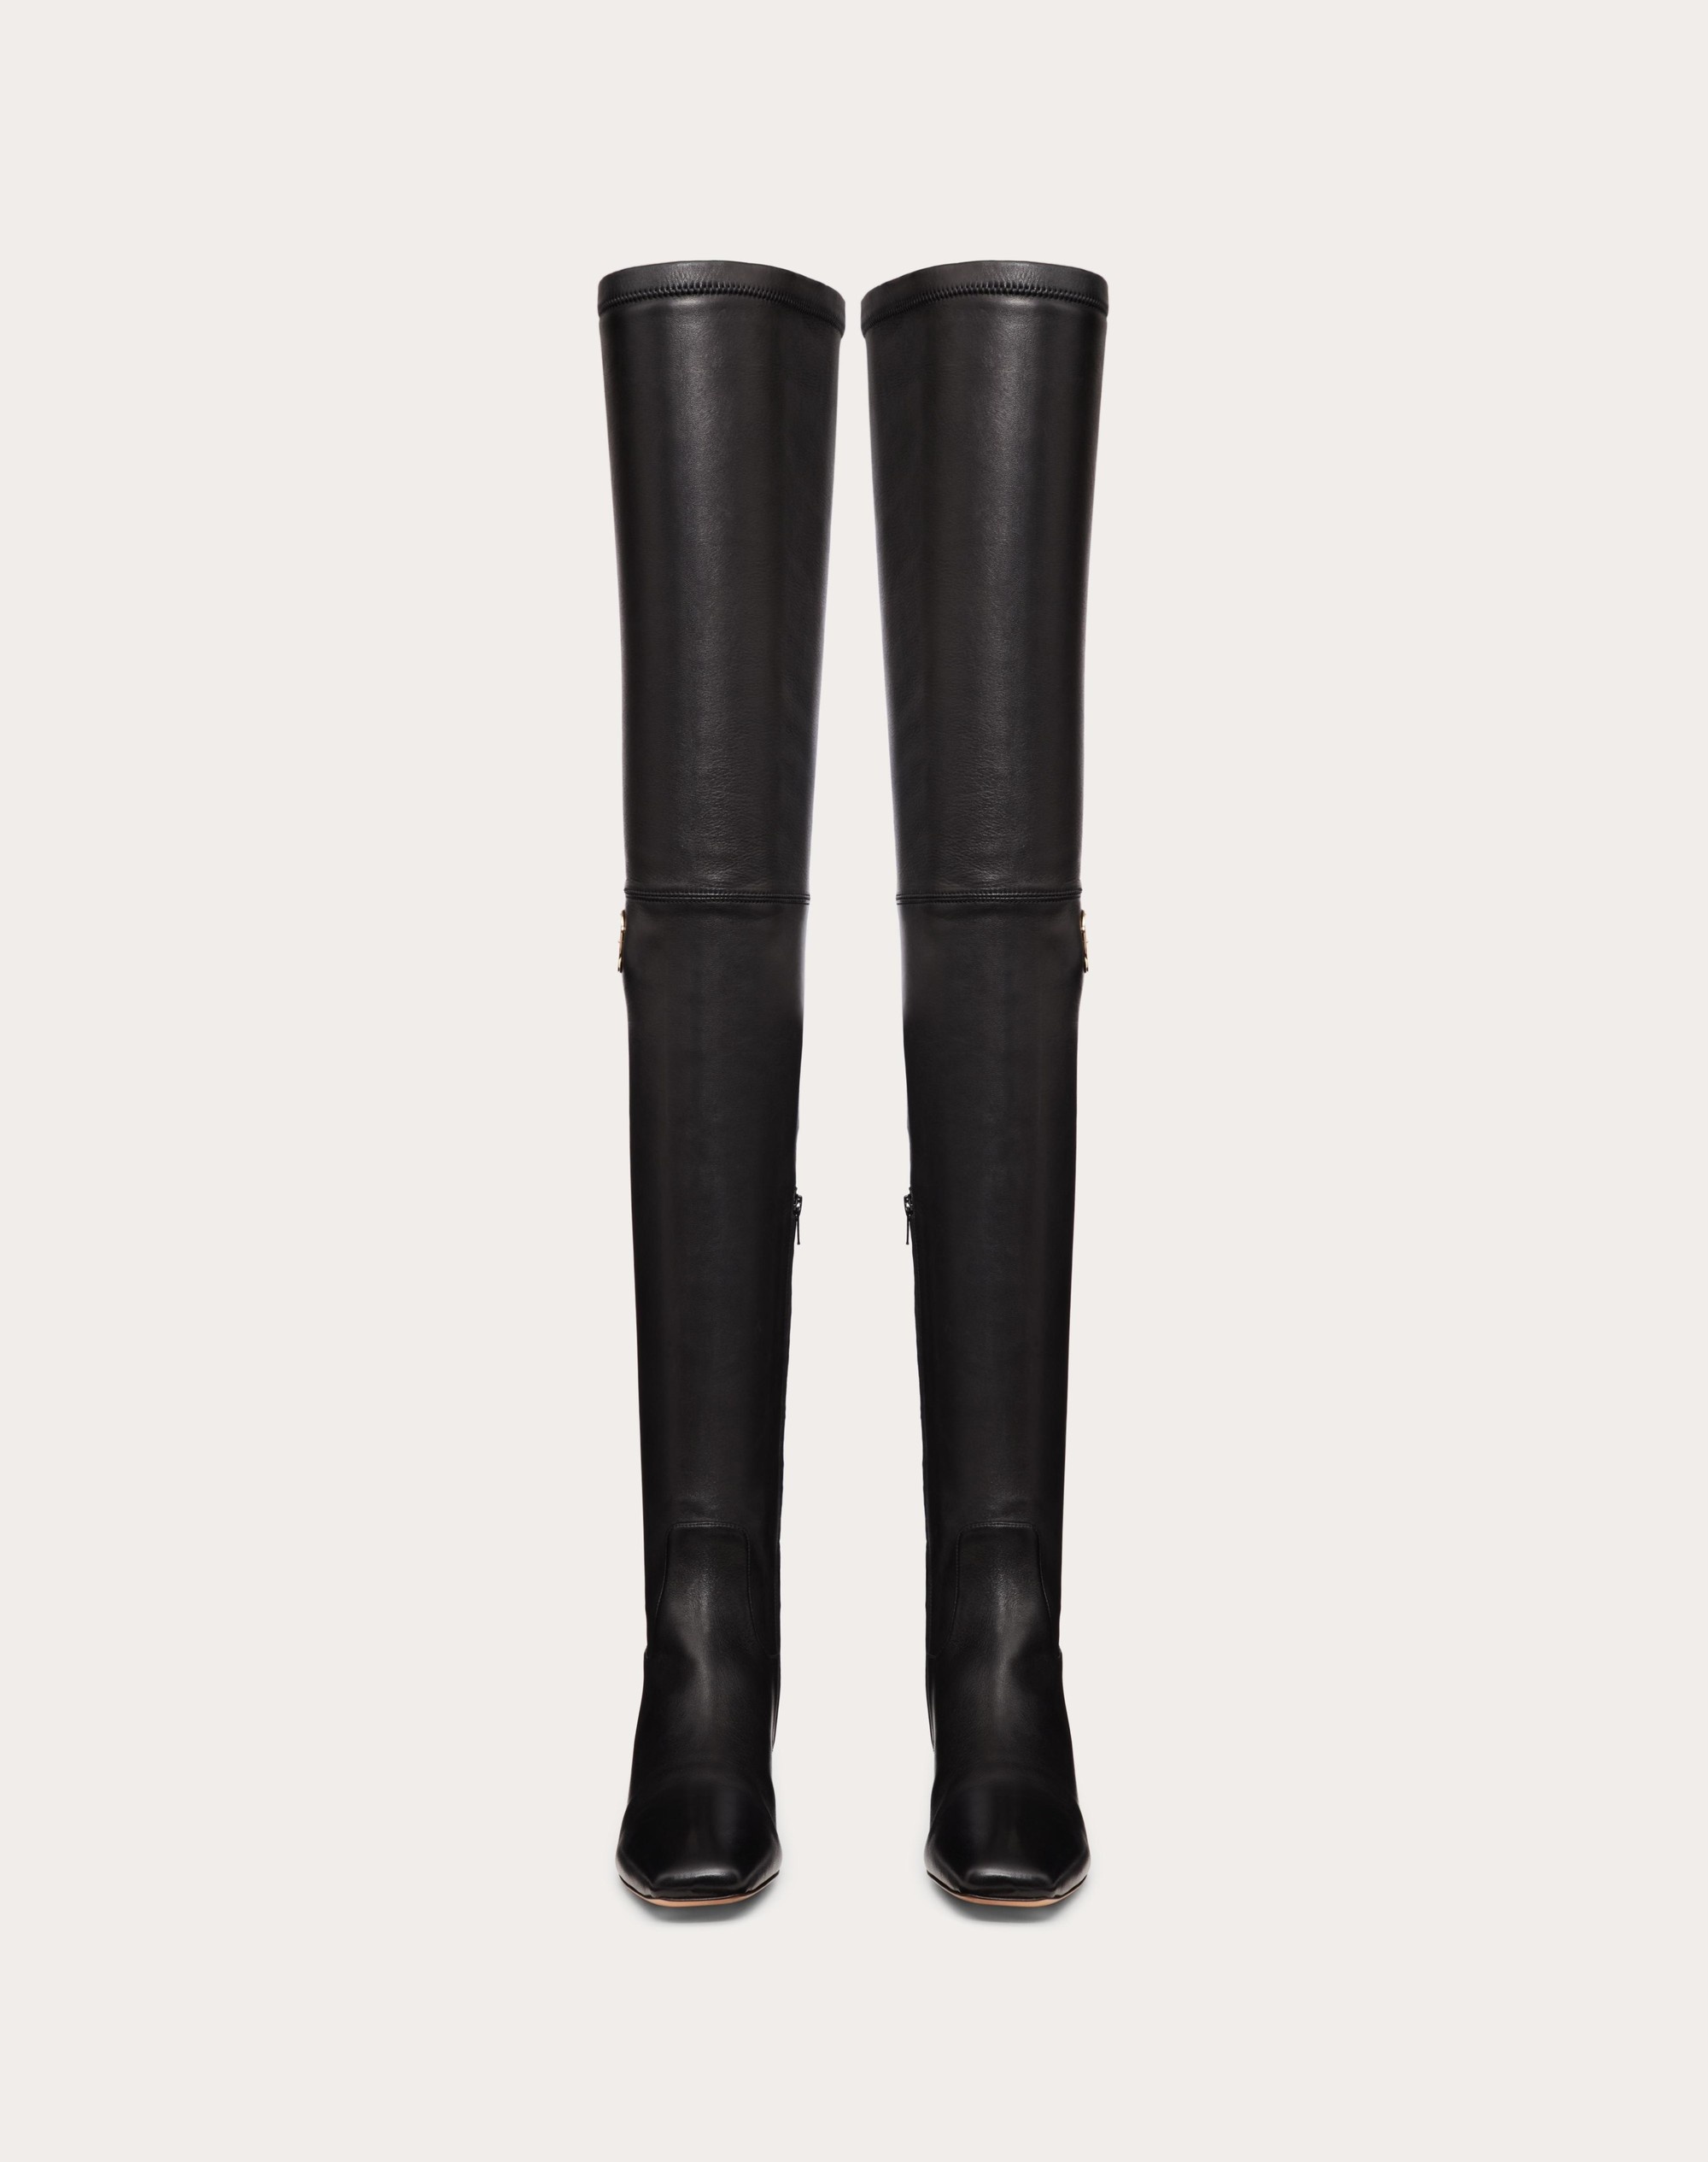 VLOGO TYPE OVER-THE-KNEE BOOT IN STRETCH NAPPA 30MM - 4